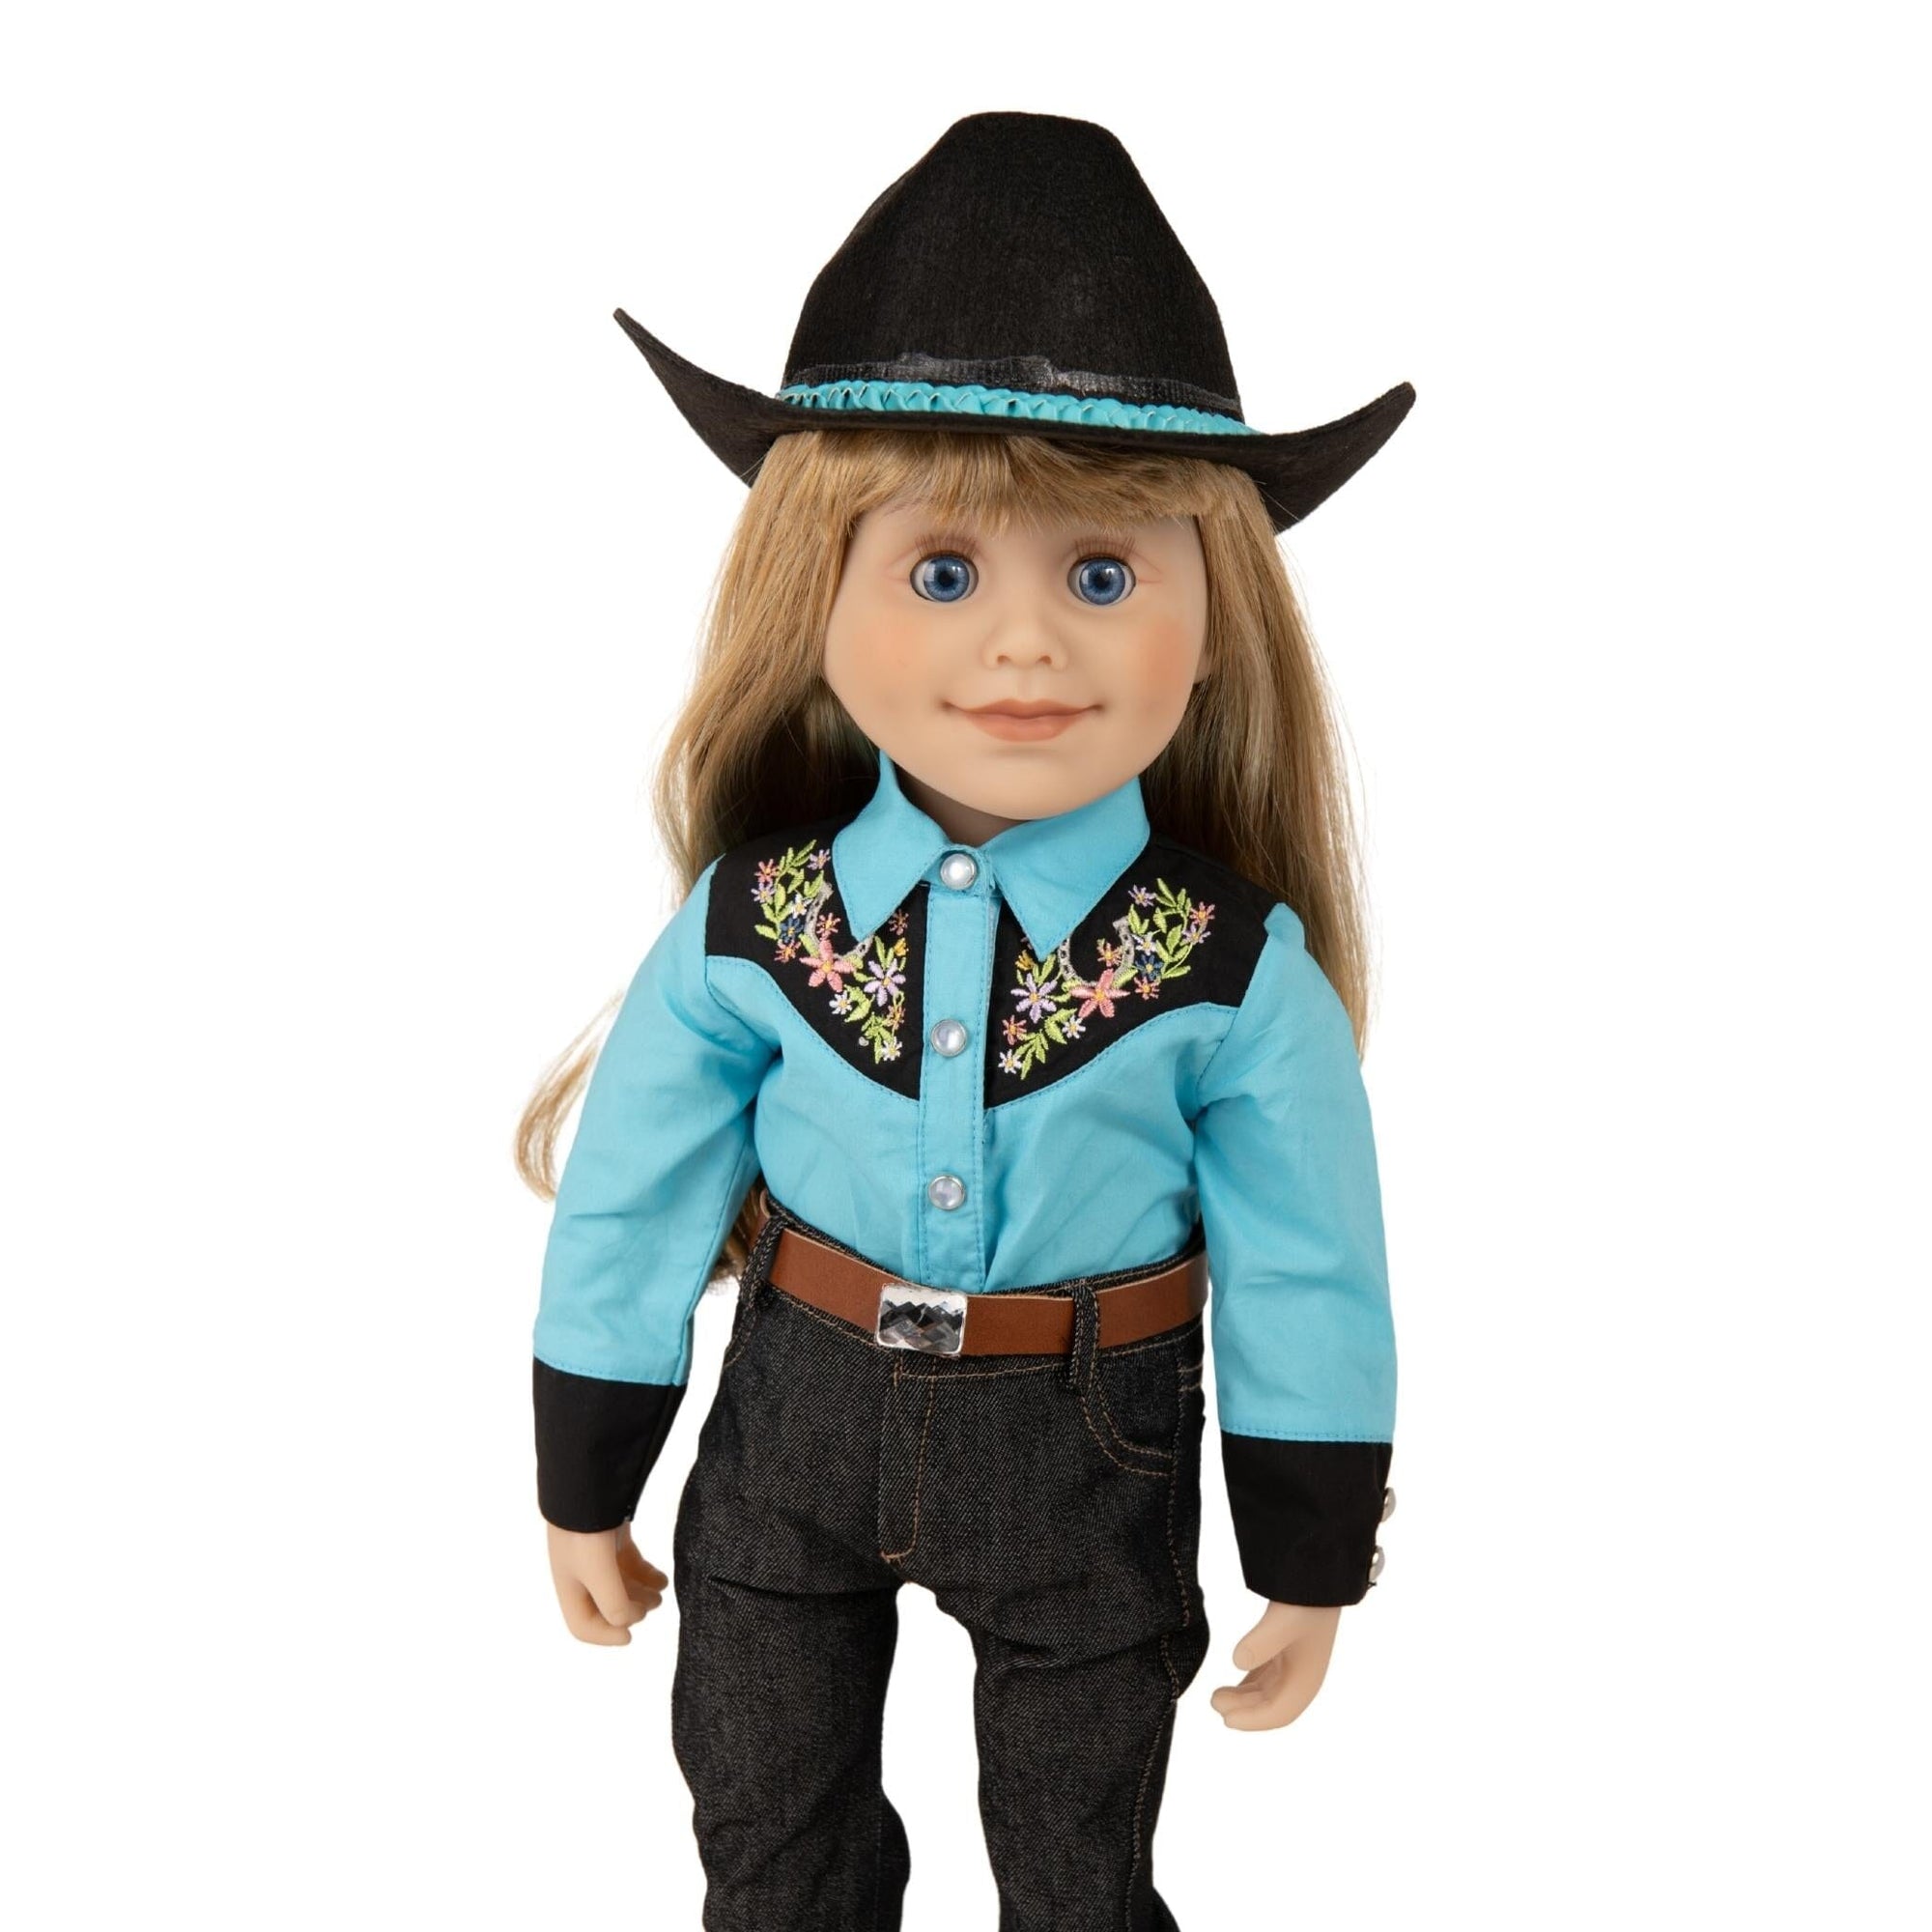 Tan Western Cowboy Hat Accessories fits 18 inch American Girl Doll Clothes